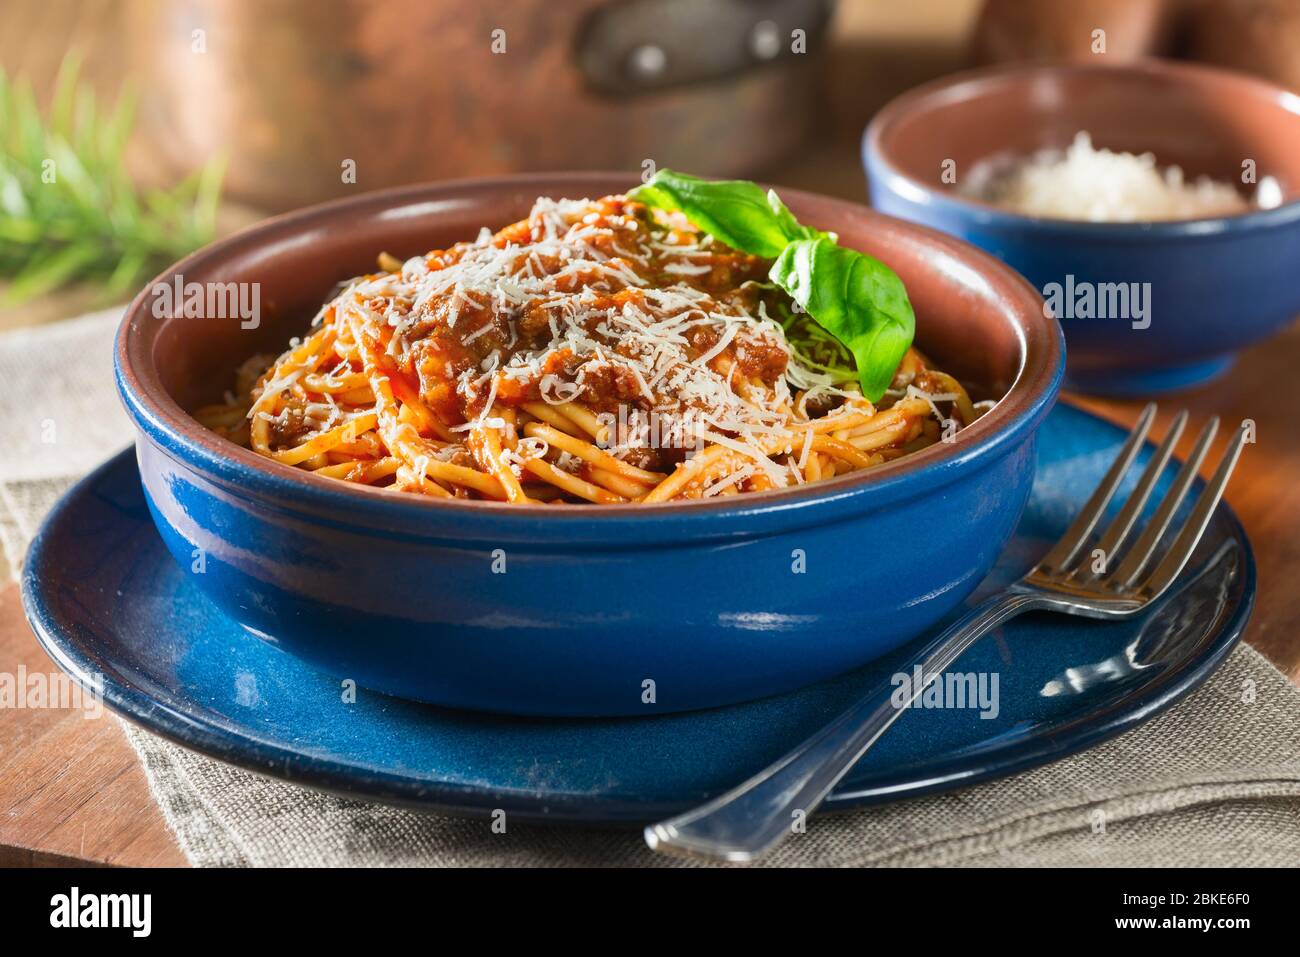 Spaghetti bolognese. Pasta in a meat and tomato sauce. Stock Photo